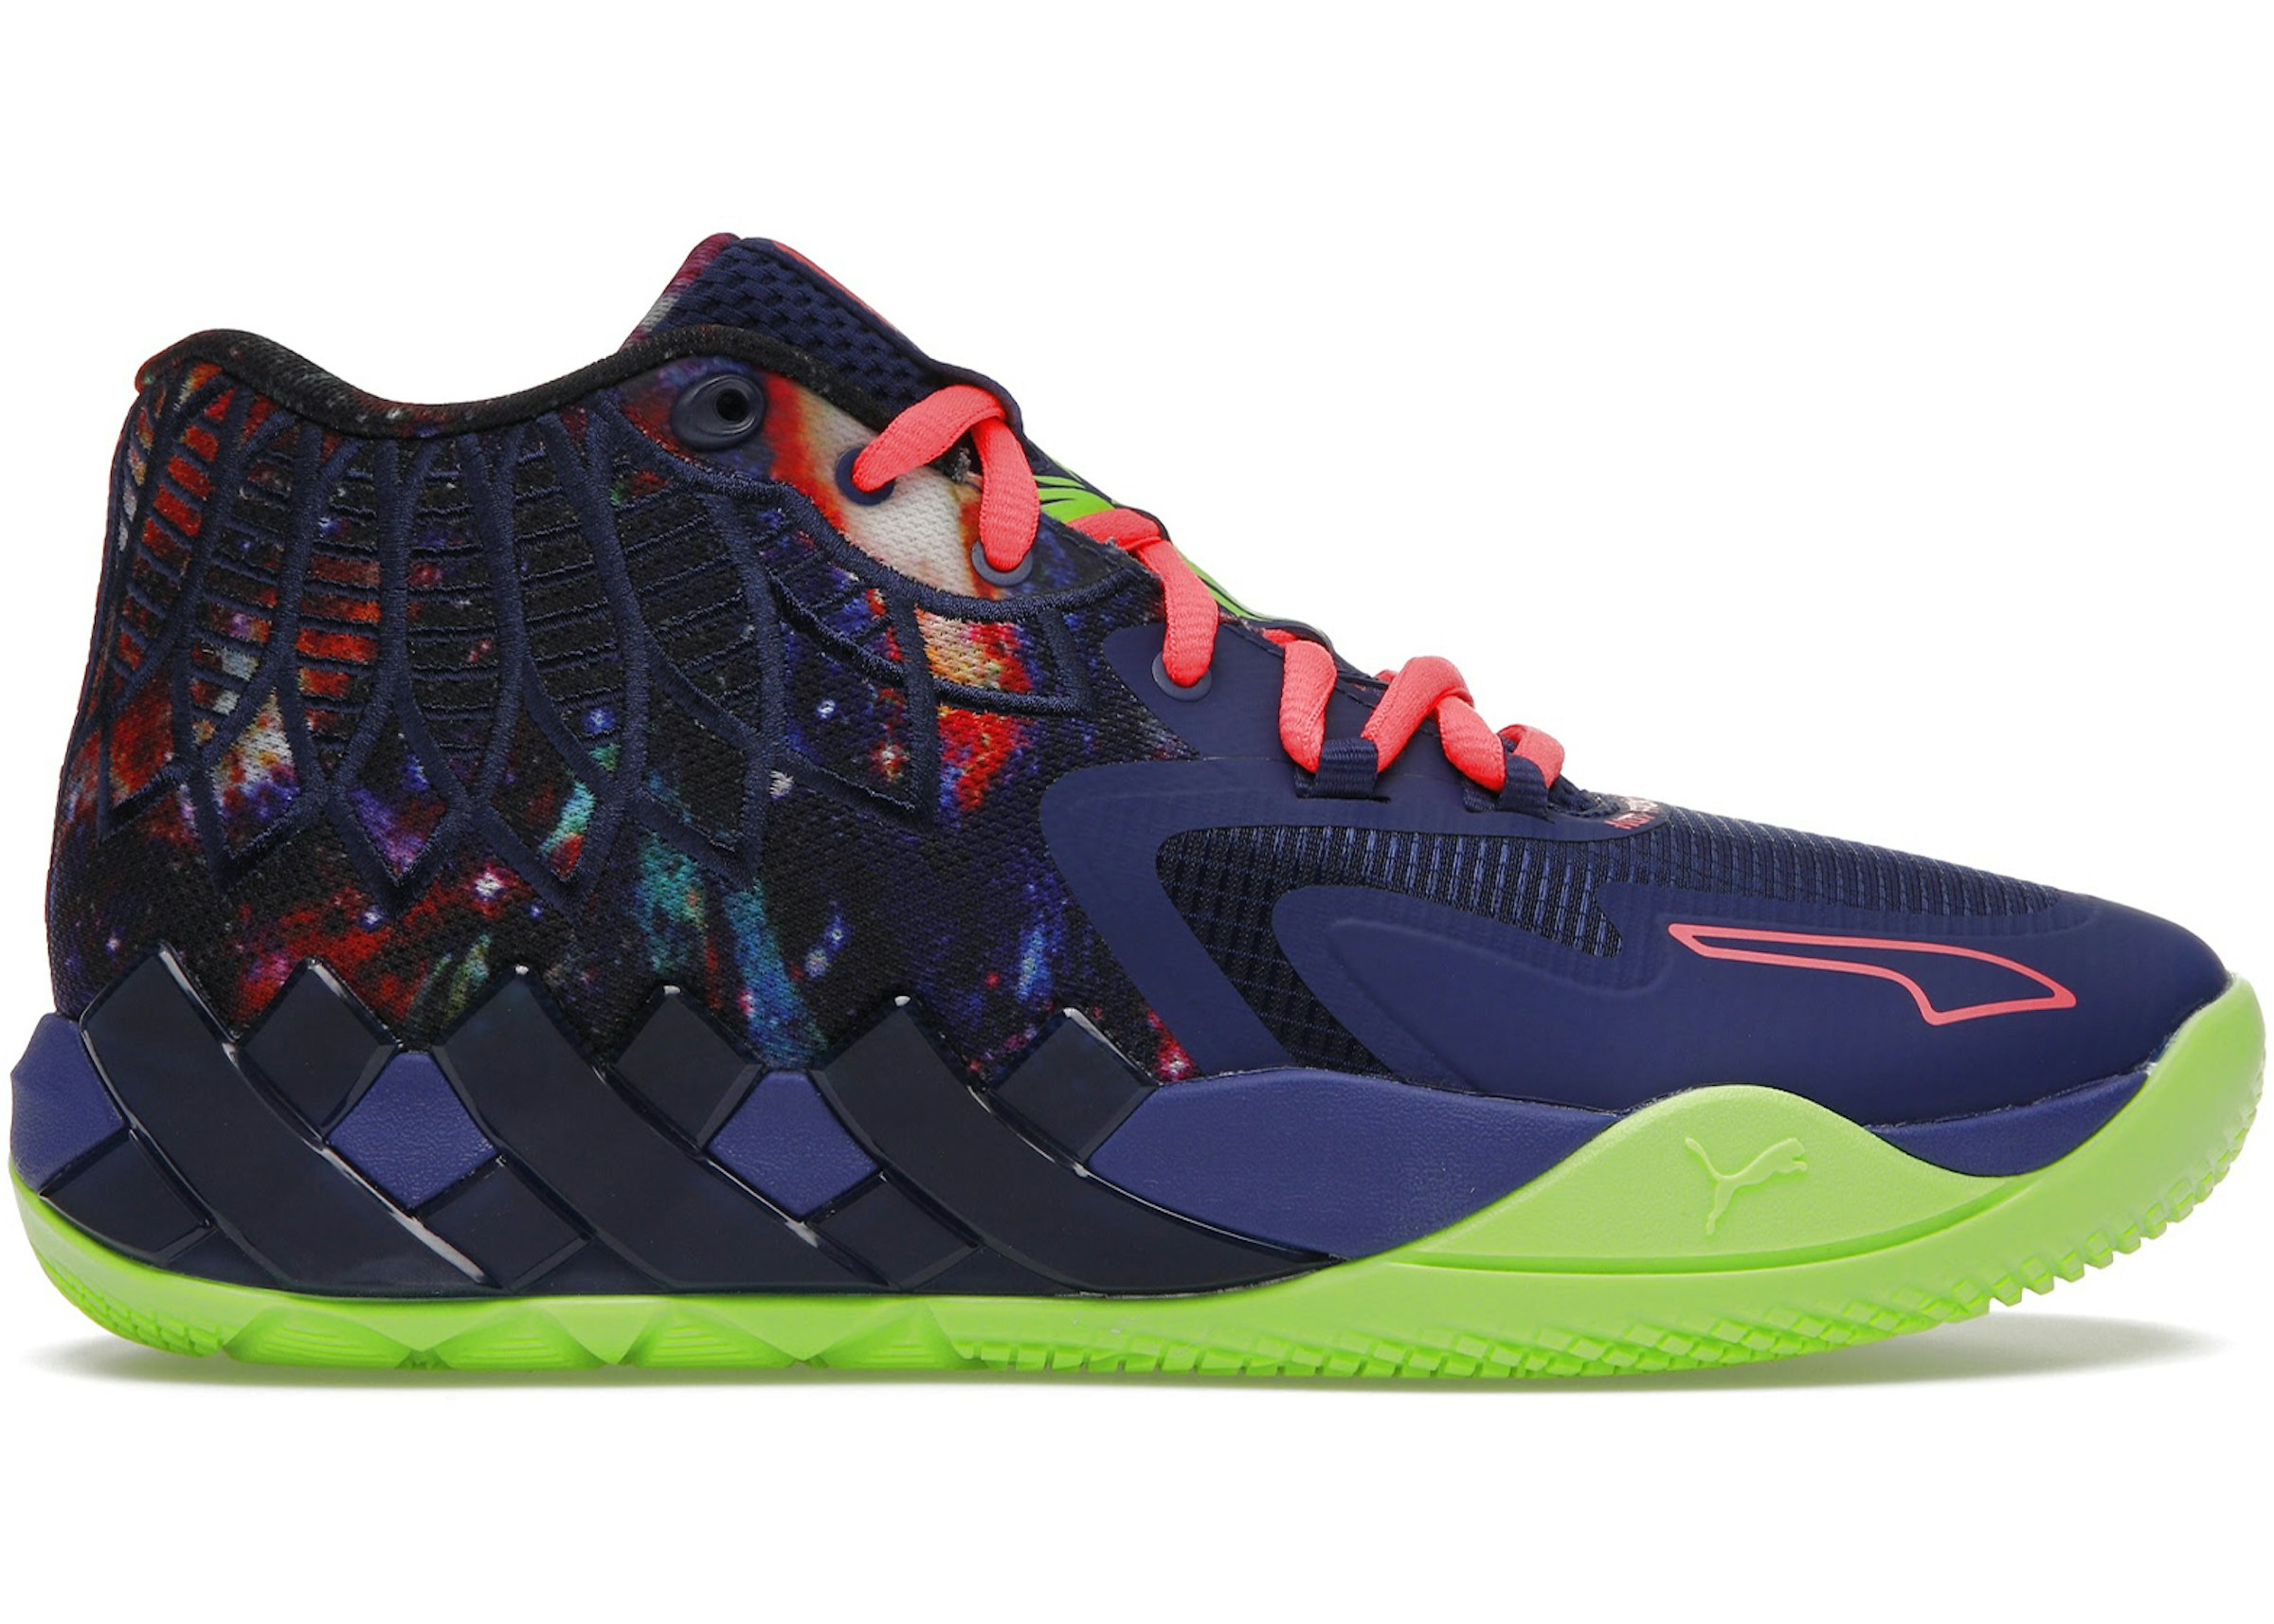 PUMA MB 01 Galaxy: Redefining Sneaker Technology and Cosmic Style